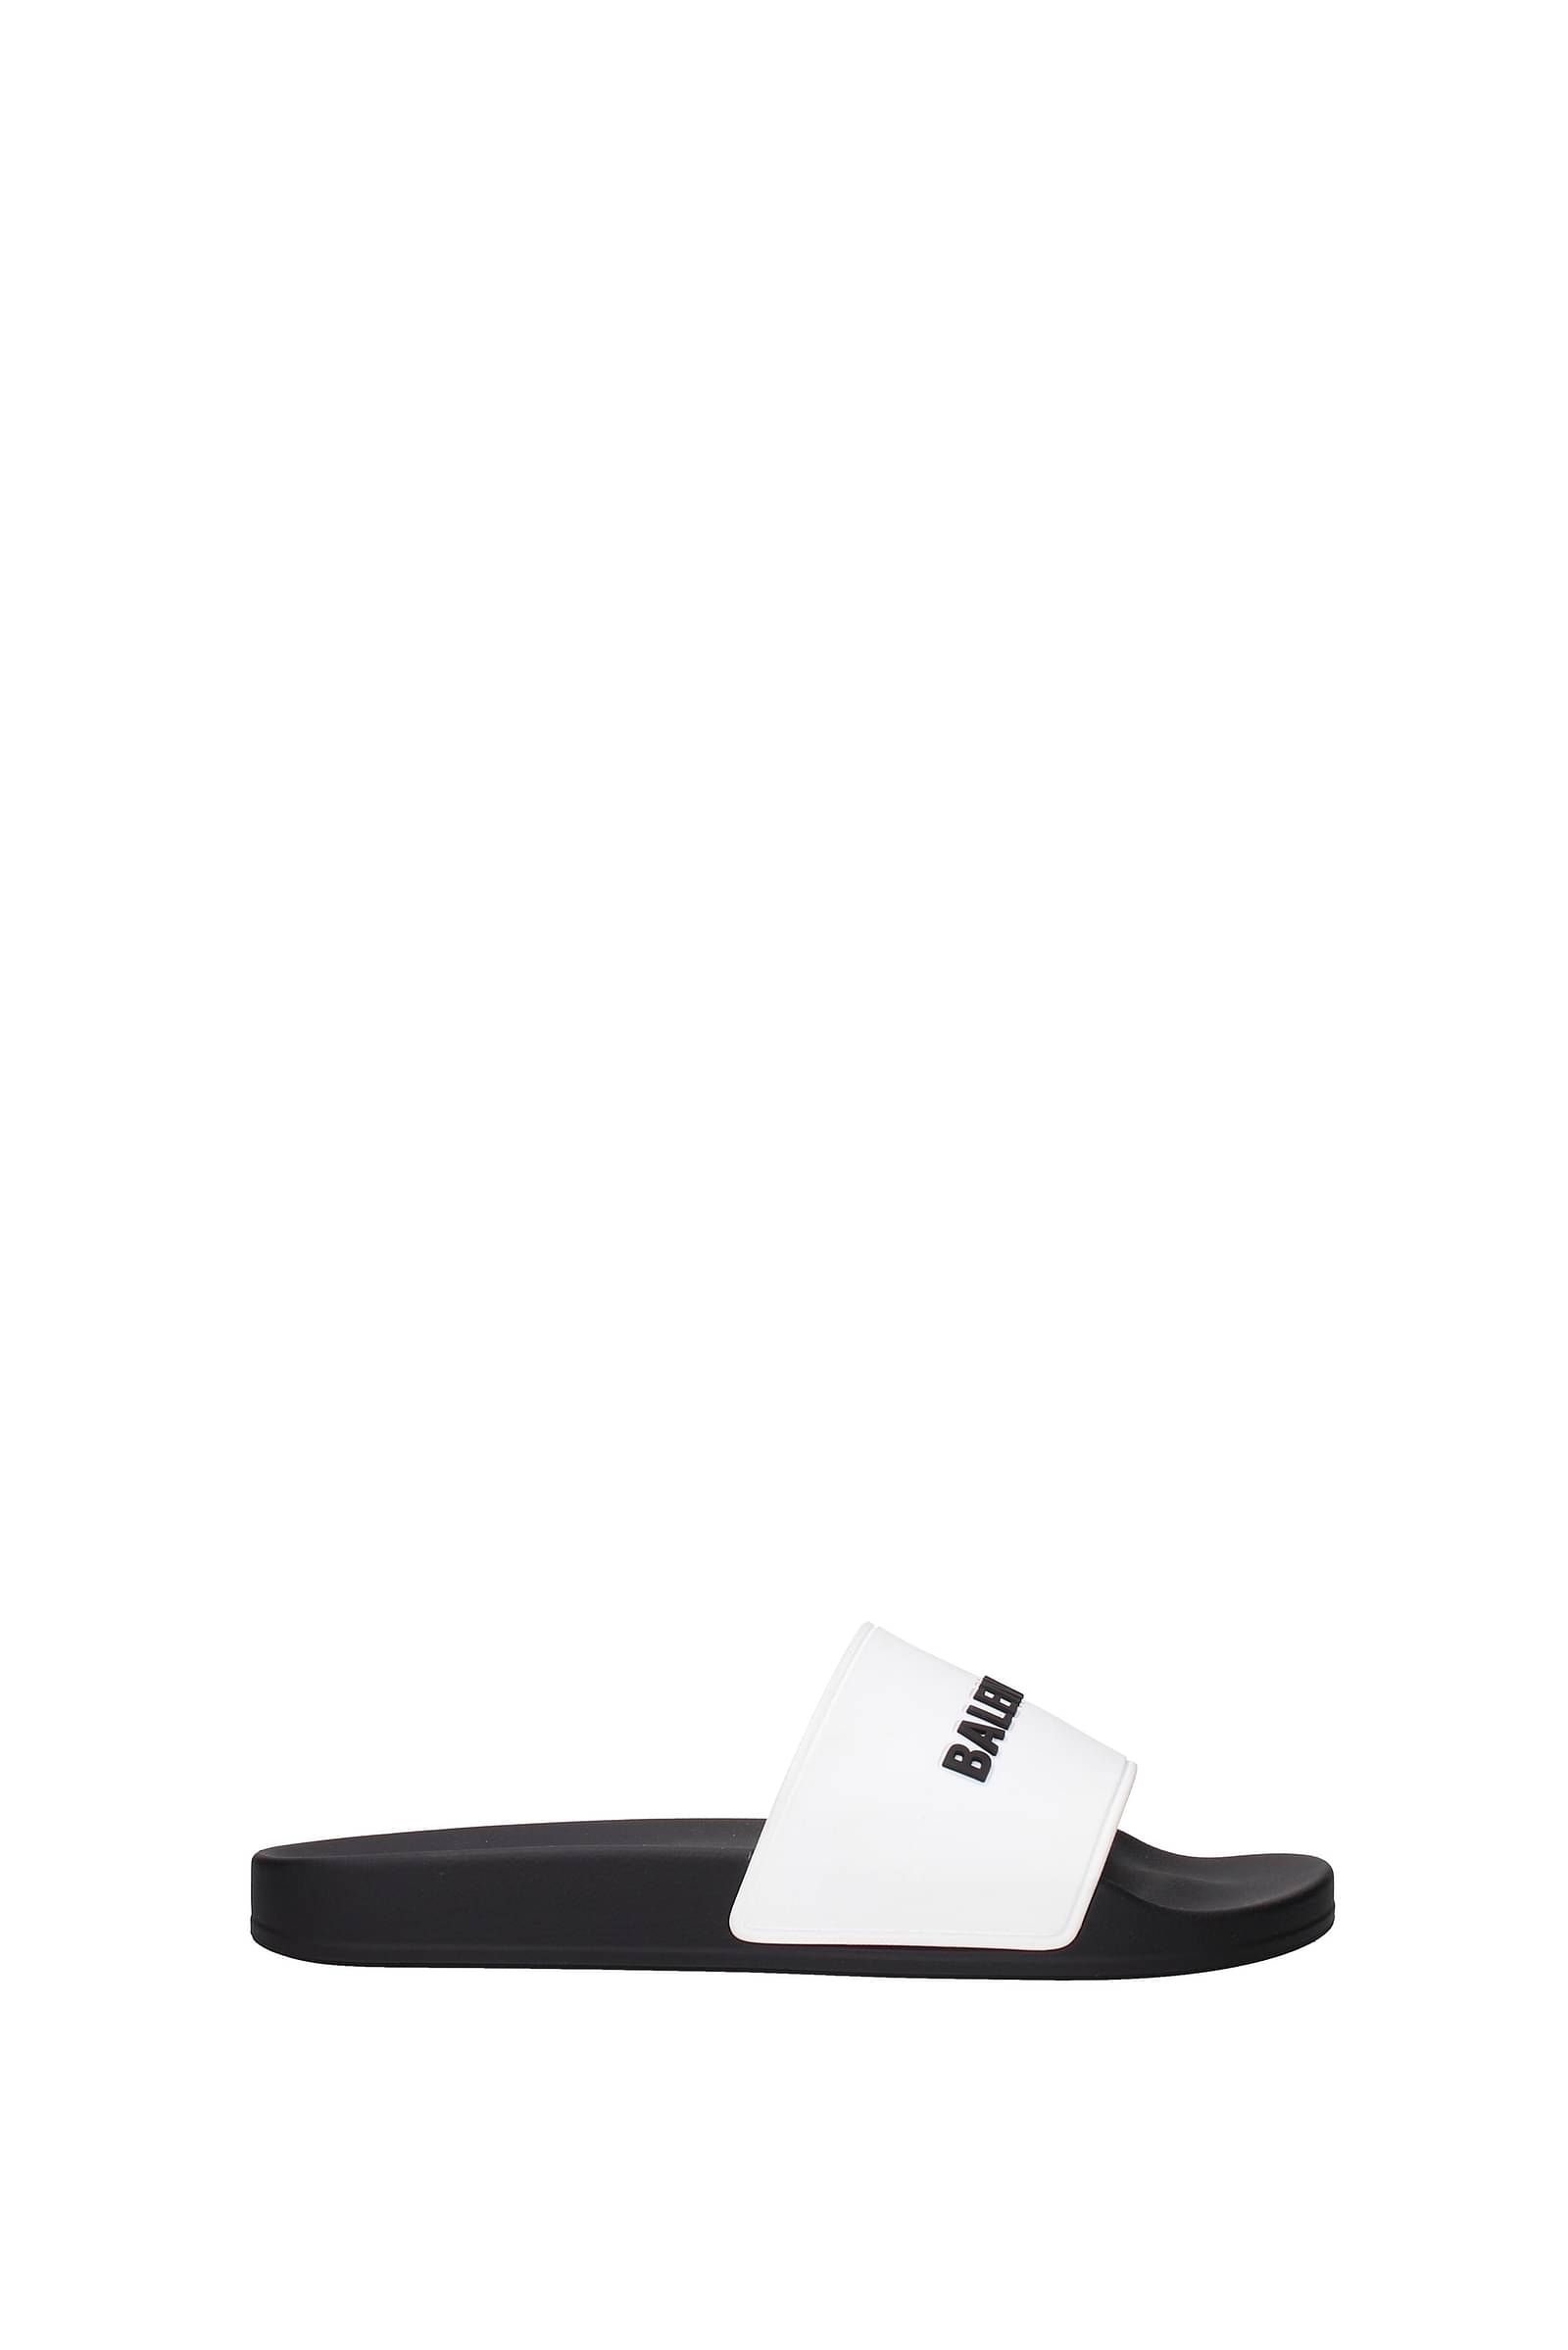 Sale  Mens Balenciaga Sandals ideas up to 40  Stylight